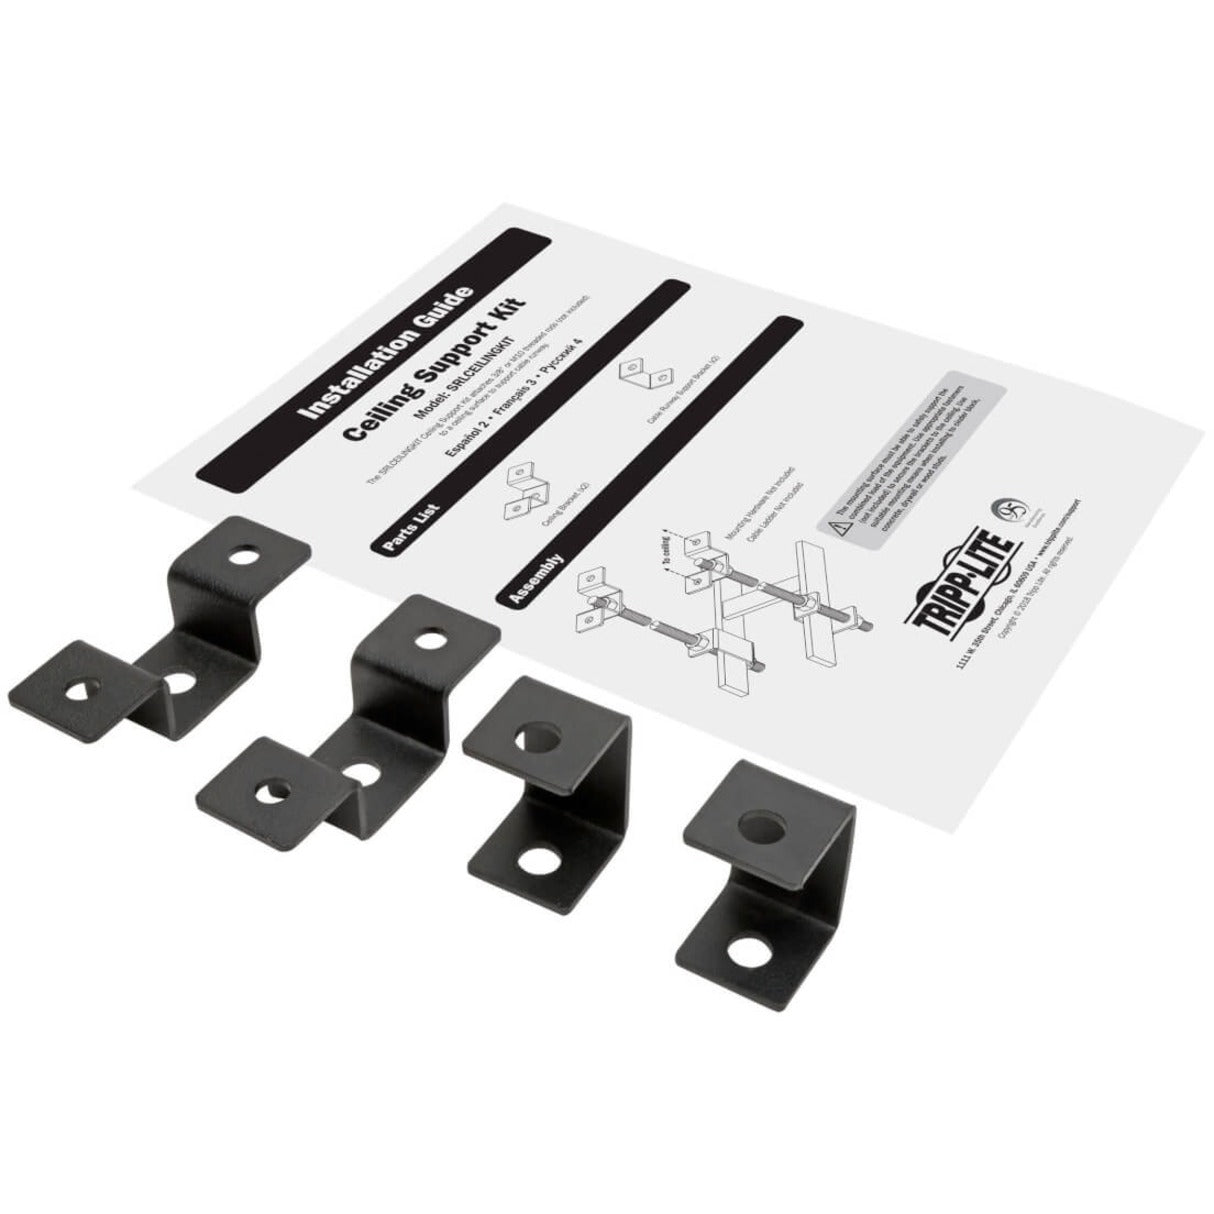 Tripp Lite SRLCEILINGKIT Ceiling Support Kit for 12 in. or 18 in. Cable Runway, Straight and 90-Degree